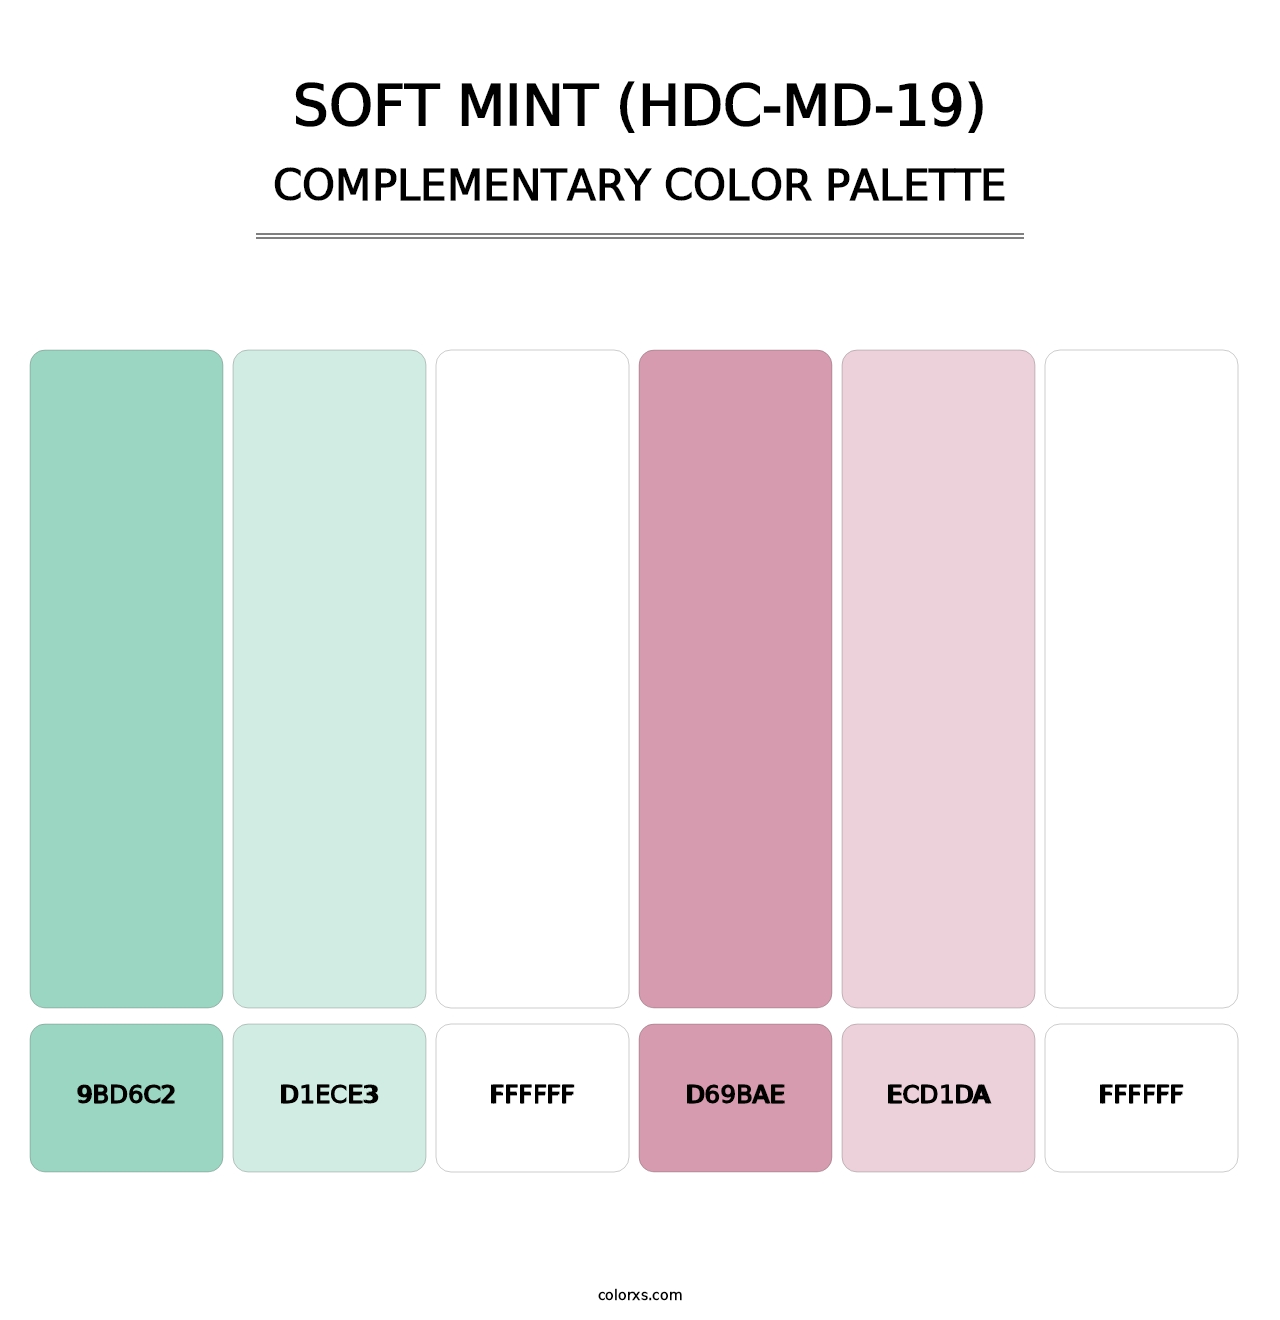 Soft Mint (HDC-MD-19) - Complementary Color Palette